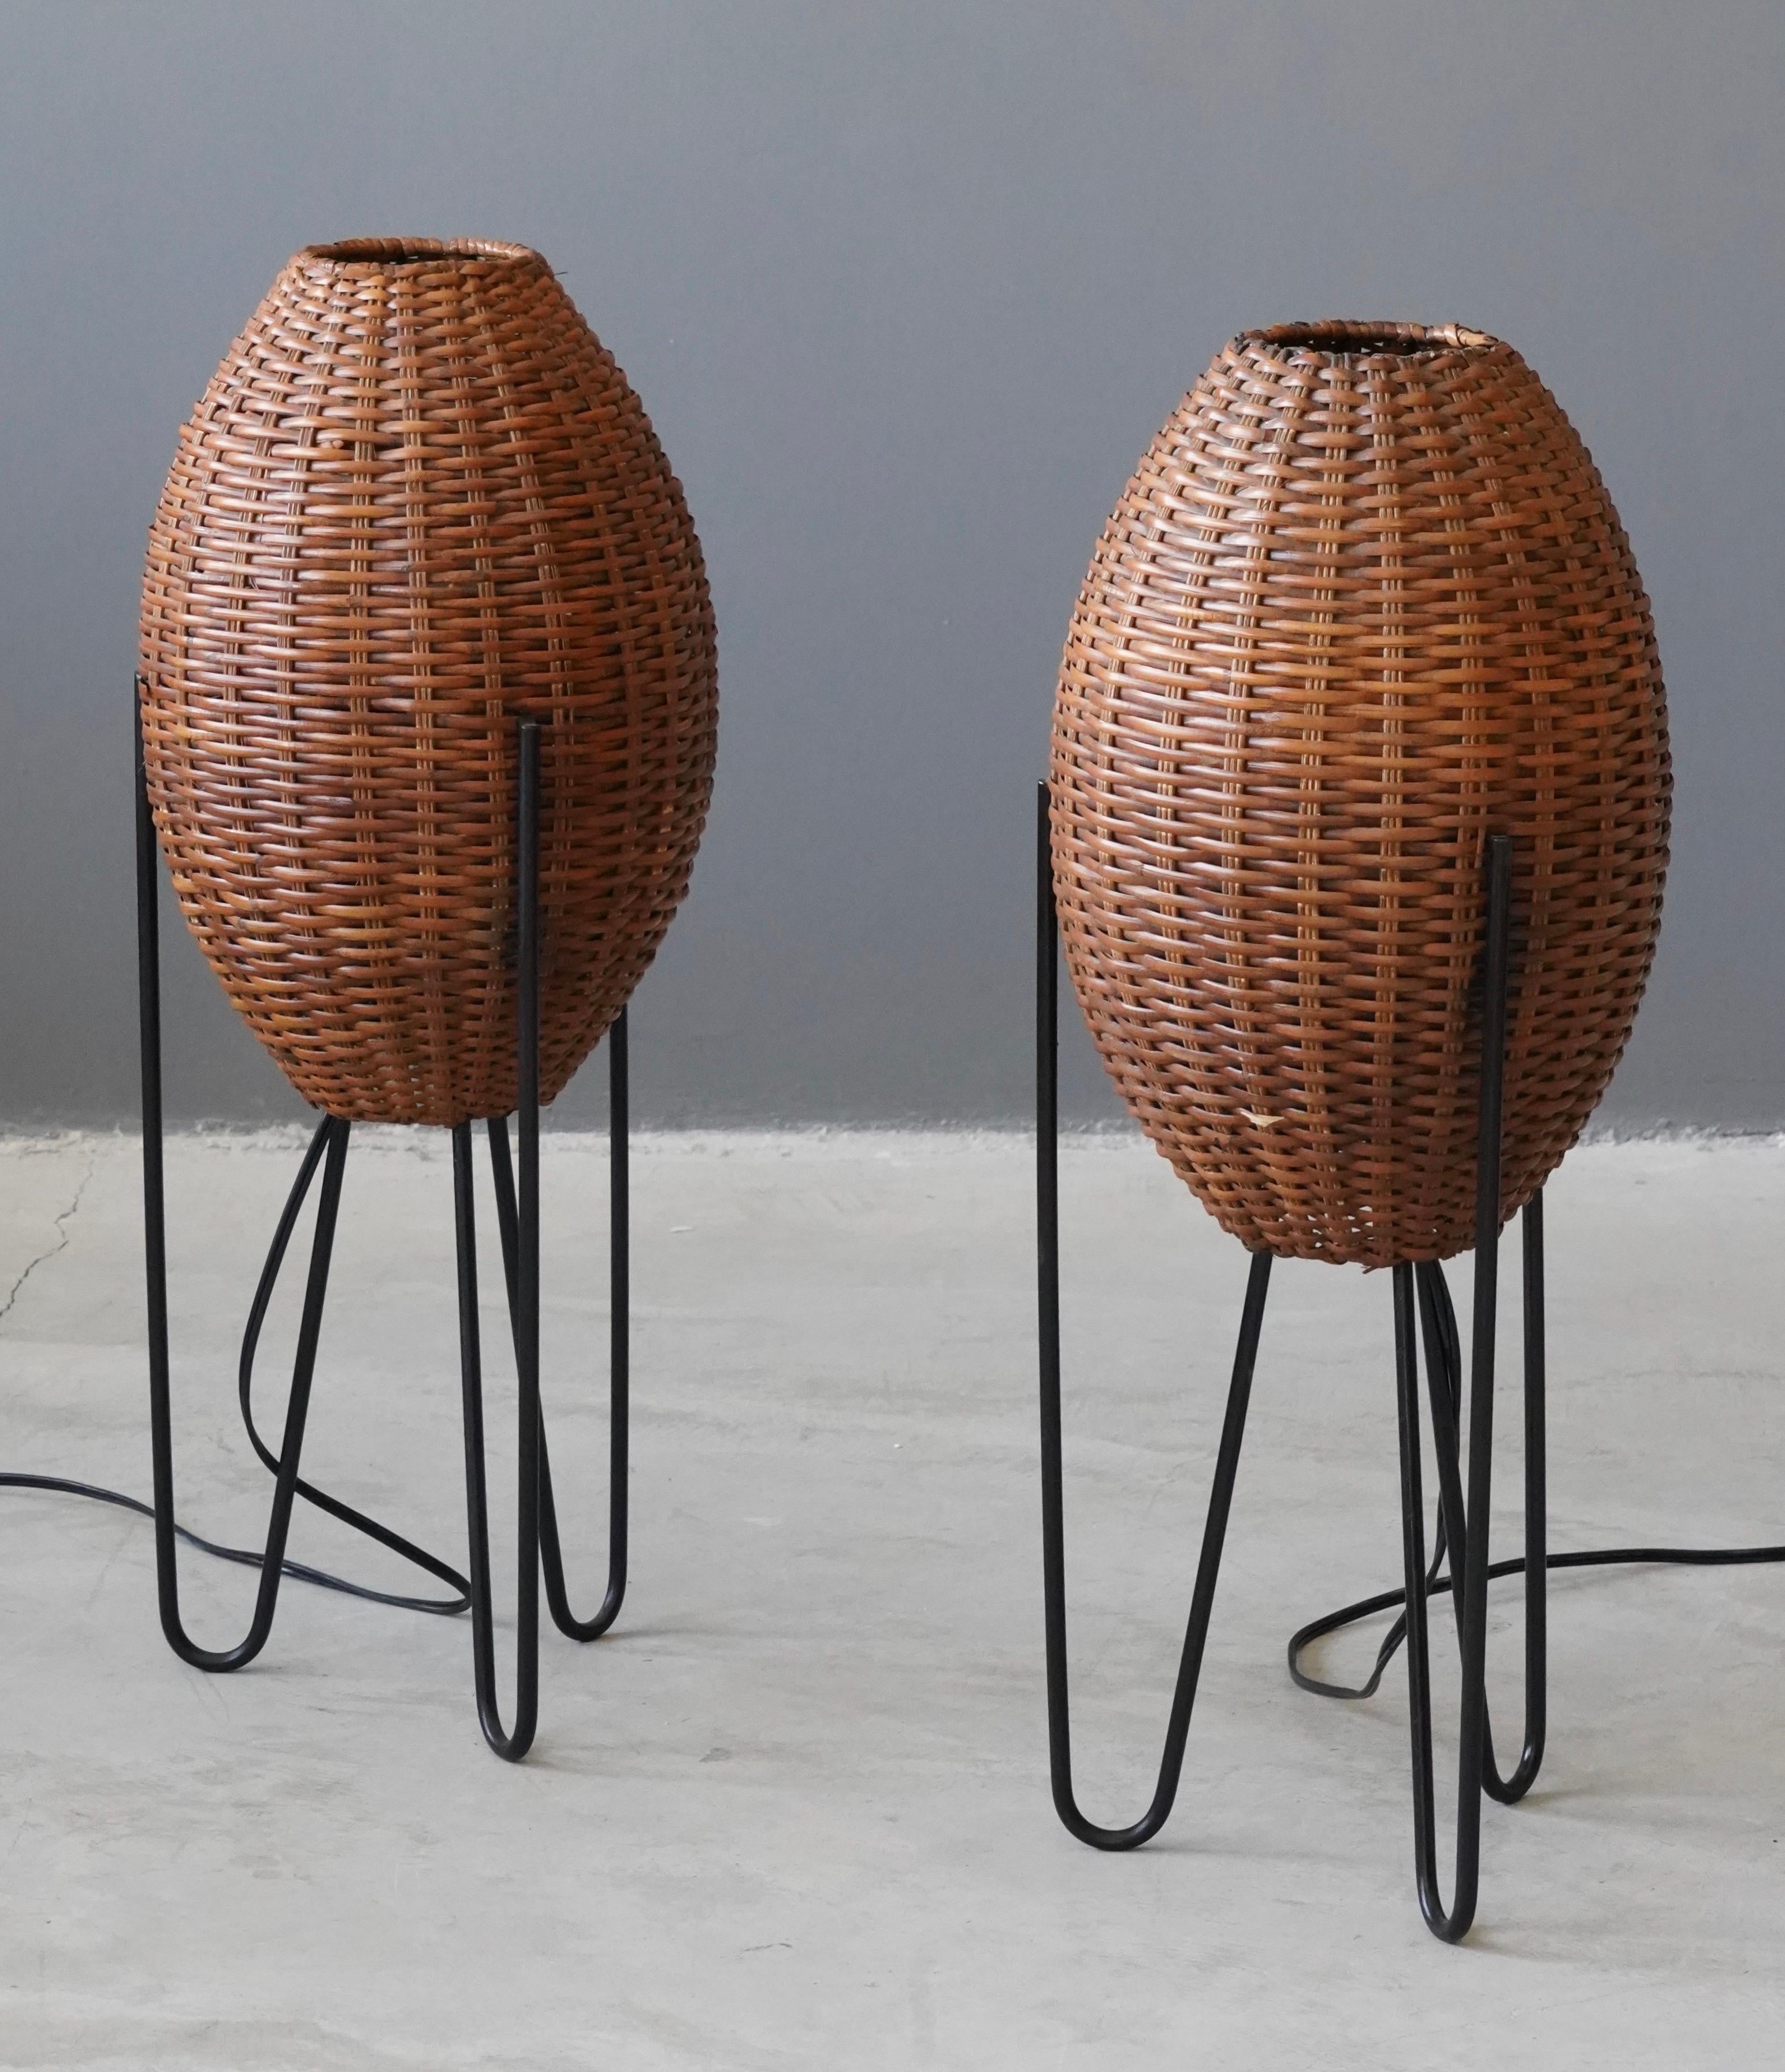 A pair of large and impressive table lamps. Designed and produced by Paul Mayén, USA, c. 1965.

Woven wicker lampshades rests on bases of black enameled metal. 

Other designers of the period include Isamu Noguchi, George Kovacs, Isamu Noguchi,